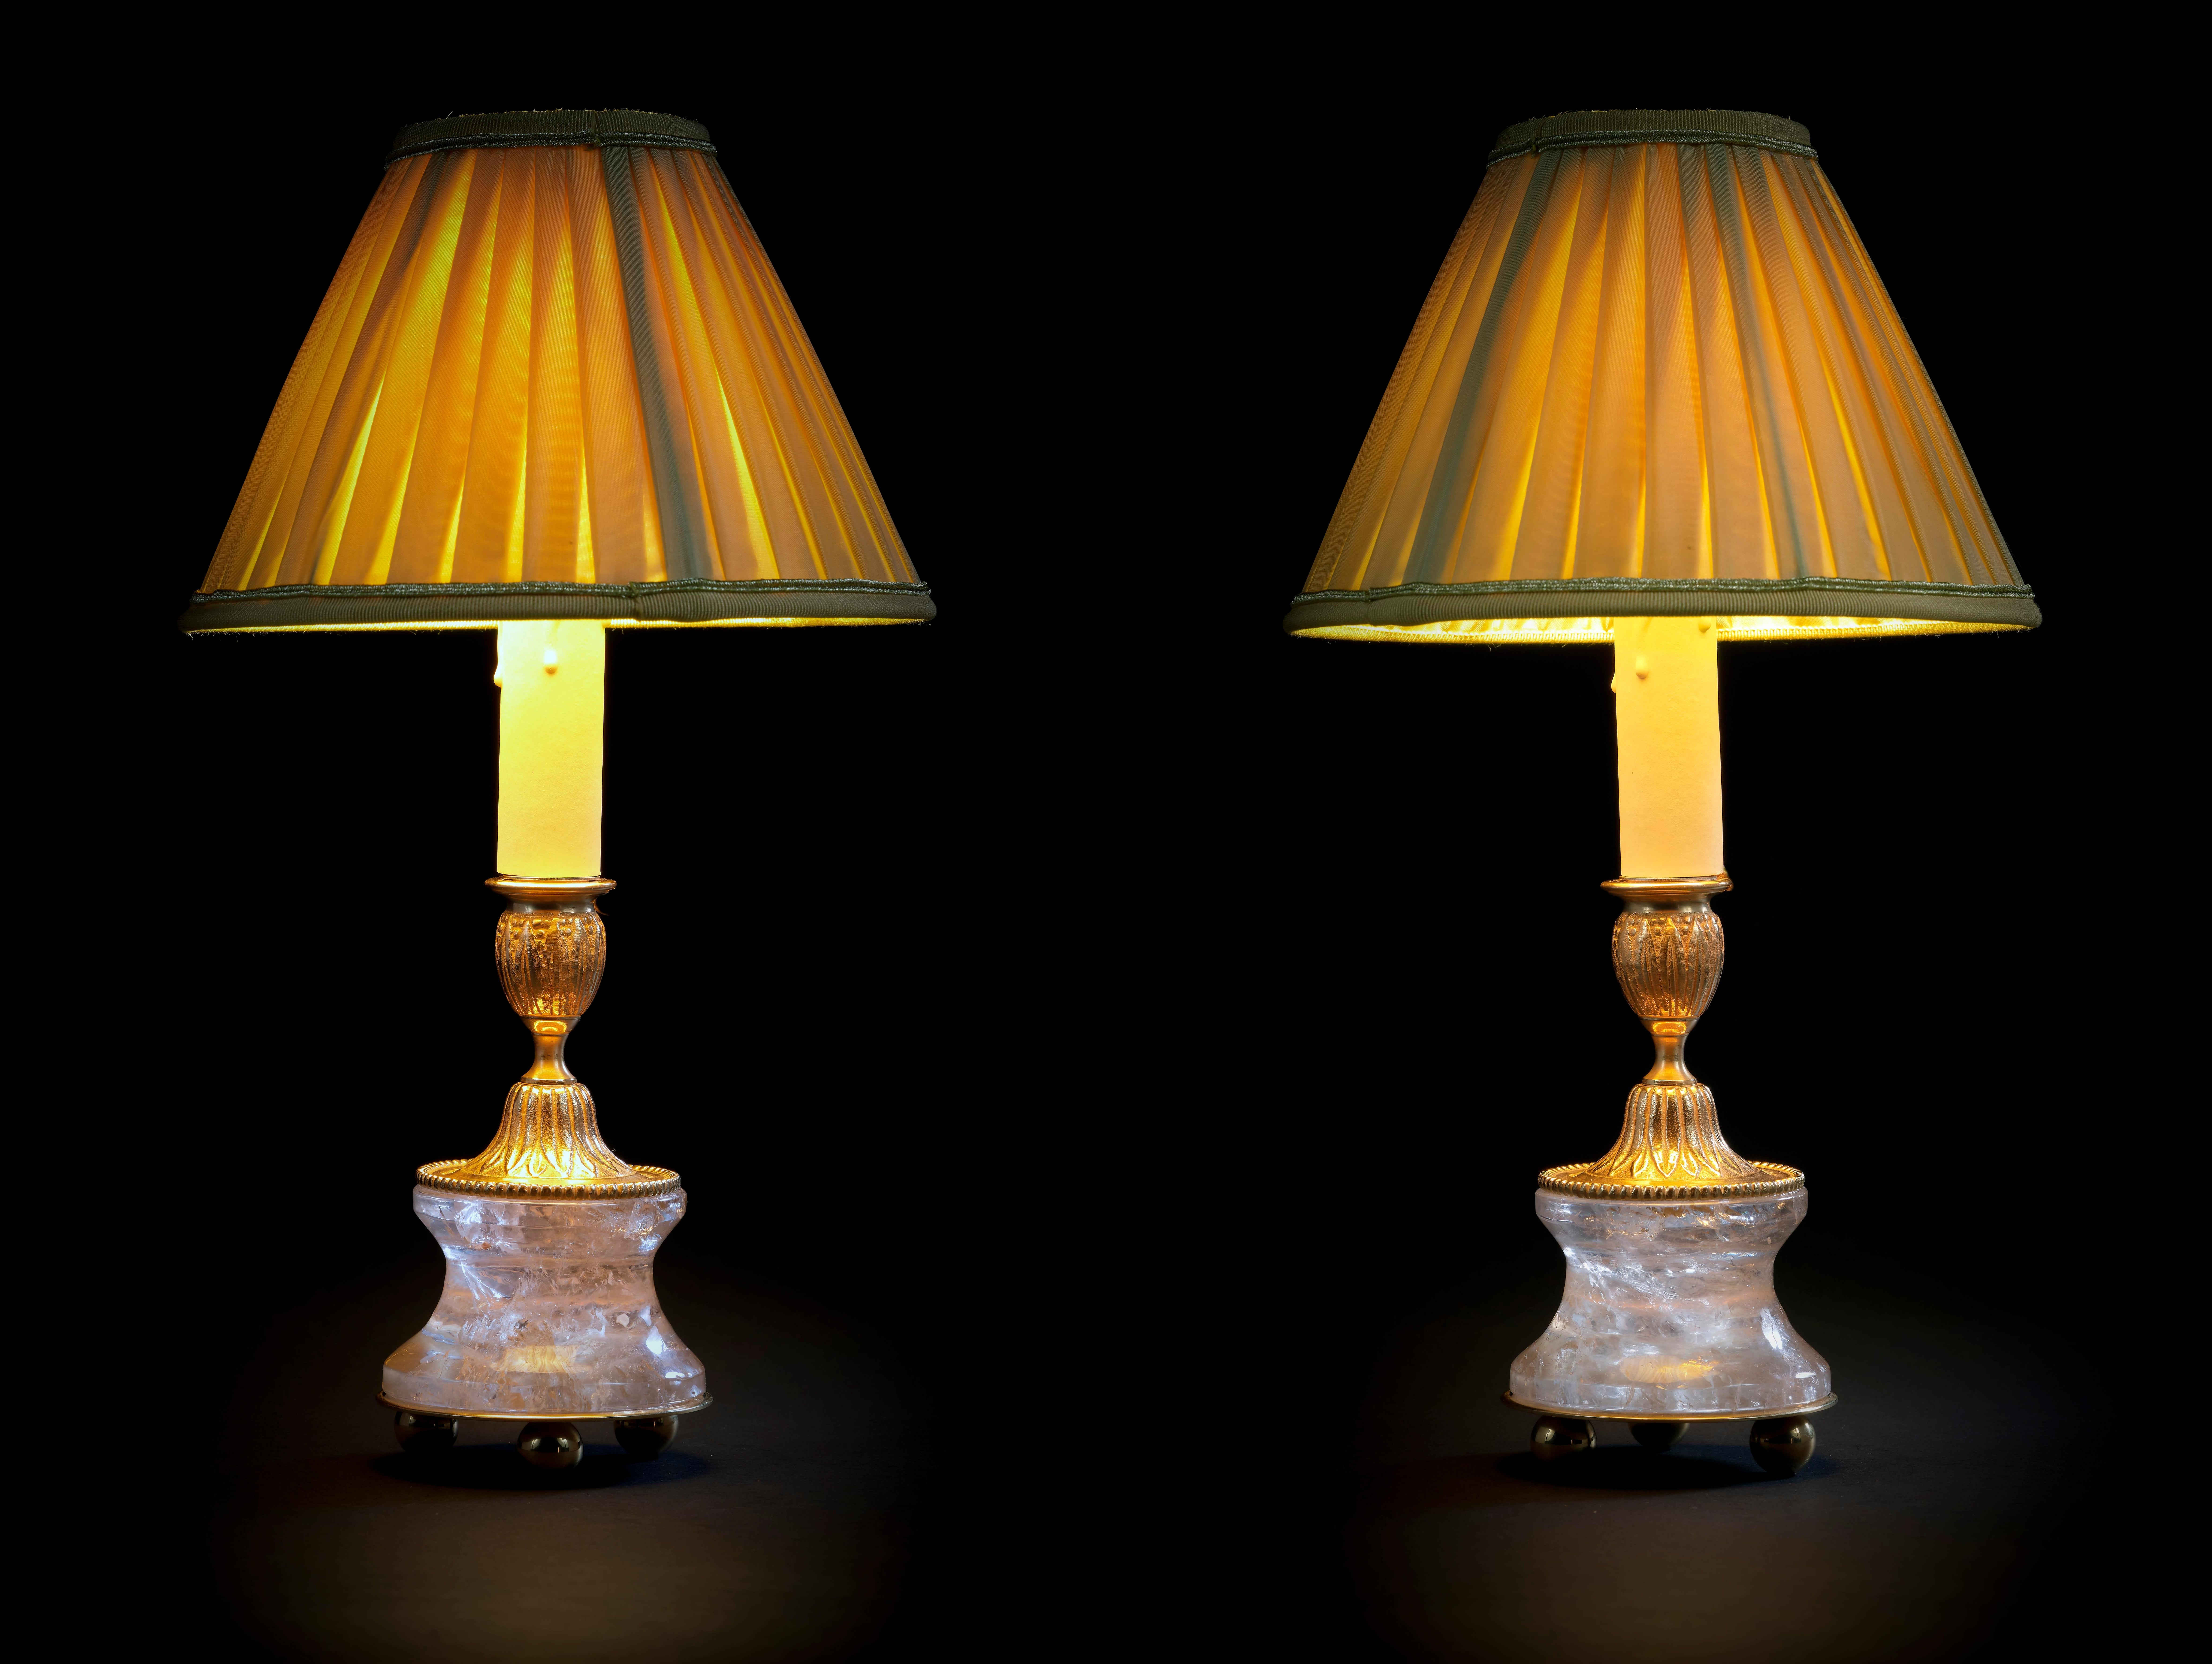 Rock crystal Louis XVI style 24-karat ormolu gilding bronze yellow gold shades made by Alexandre Vossion. This model can be also used as candlesticks to make your dining table so chic ... Others colors for the lampshades are also available.
Model II